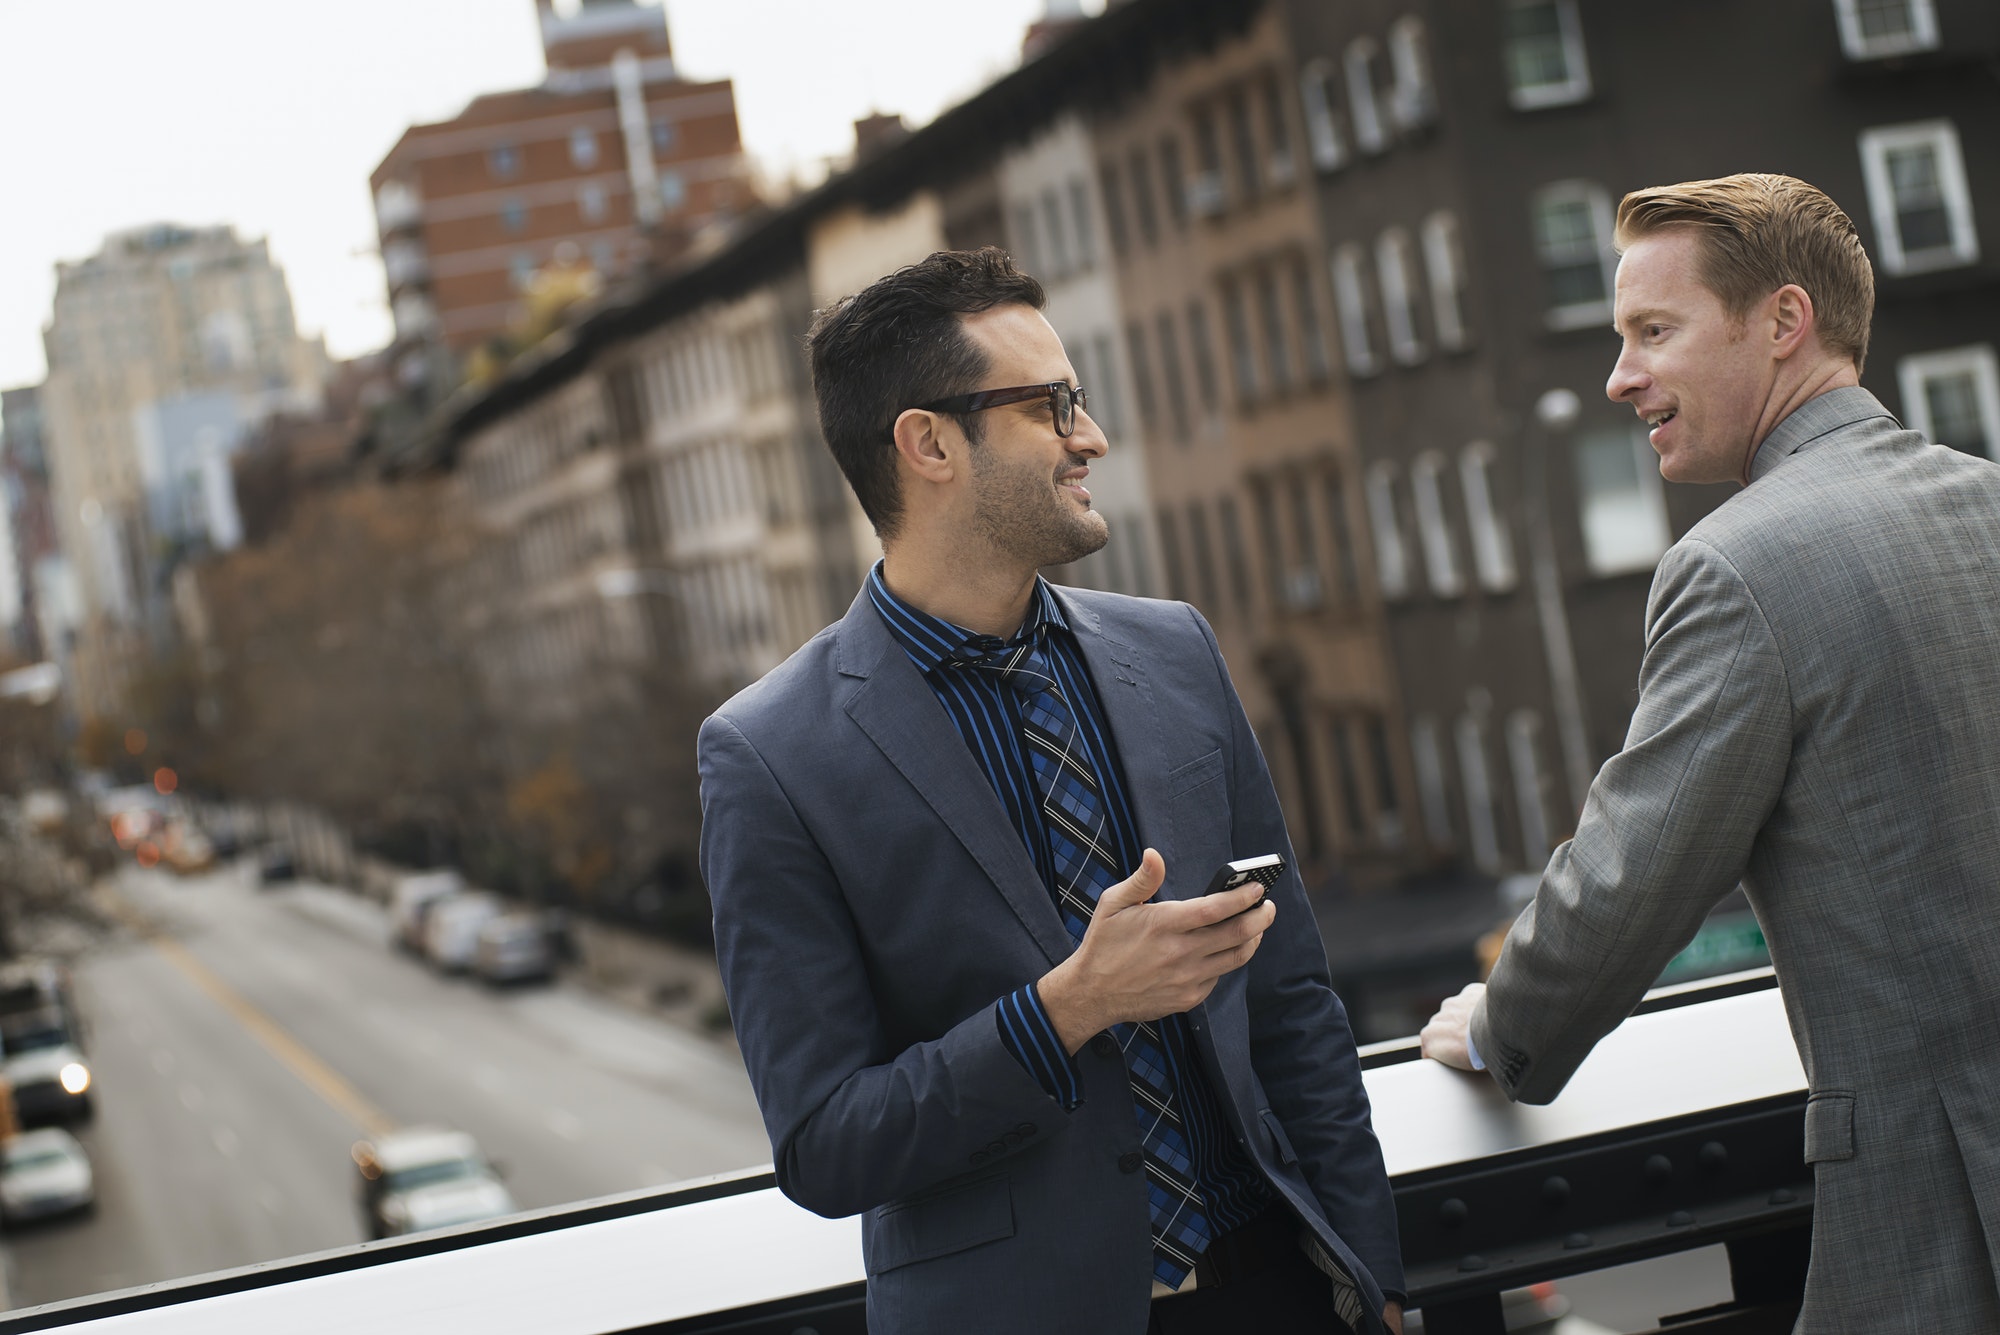 Two men standing talking on an elevated walkway above a city road.